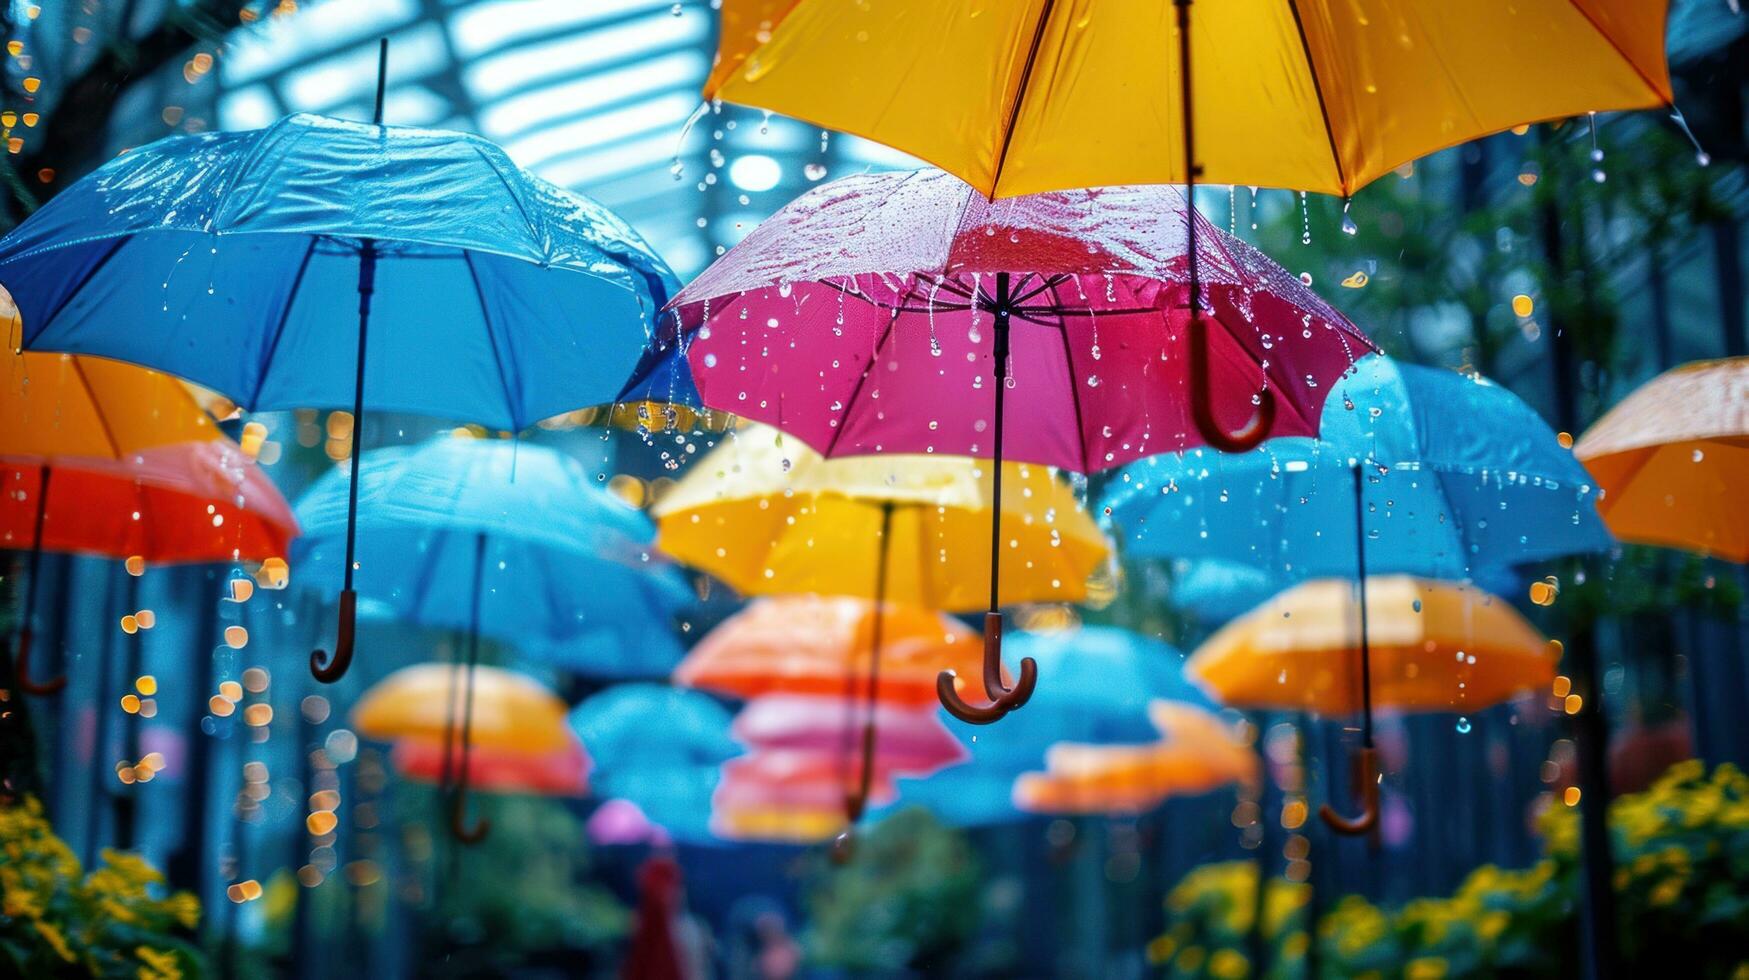 AI generated Colorful raindrops, umbrellas, and radiant hues create a cheerful spring display photo